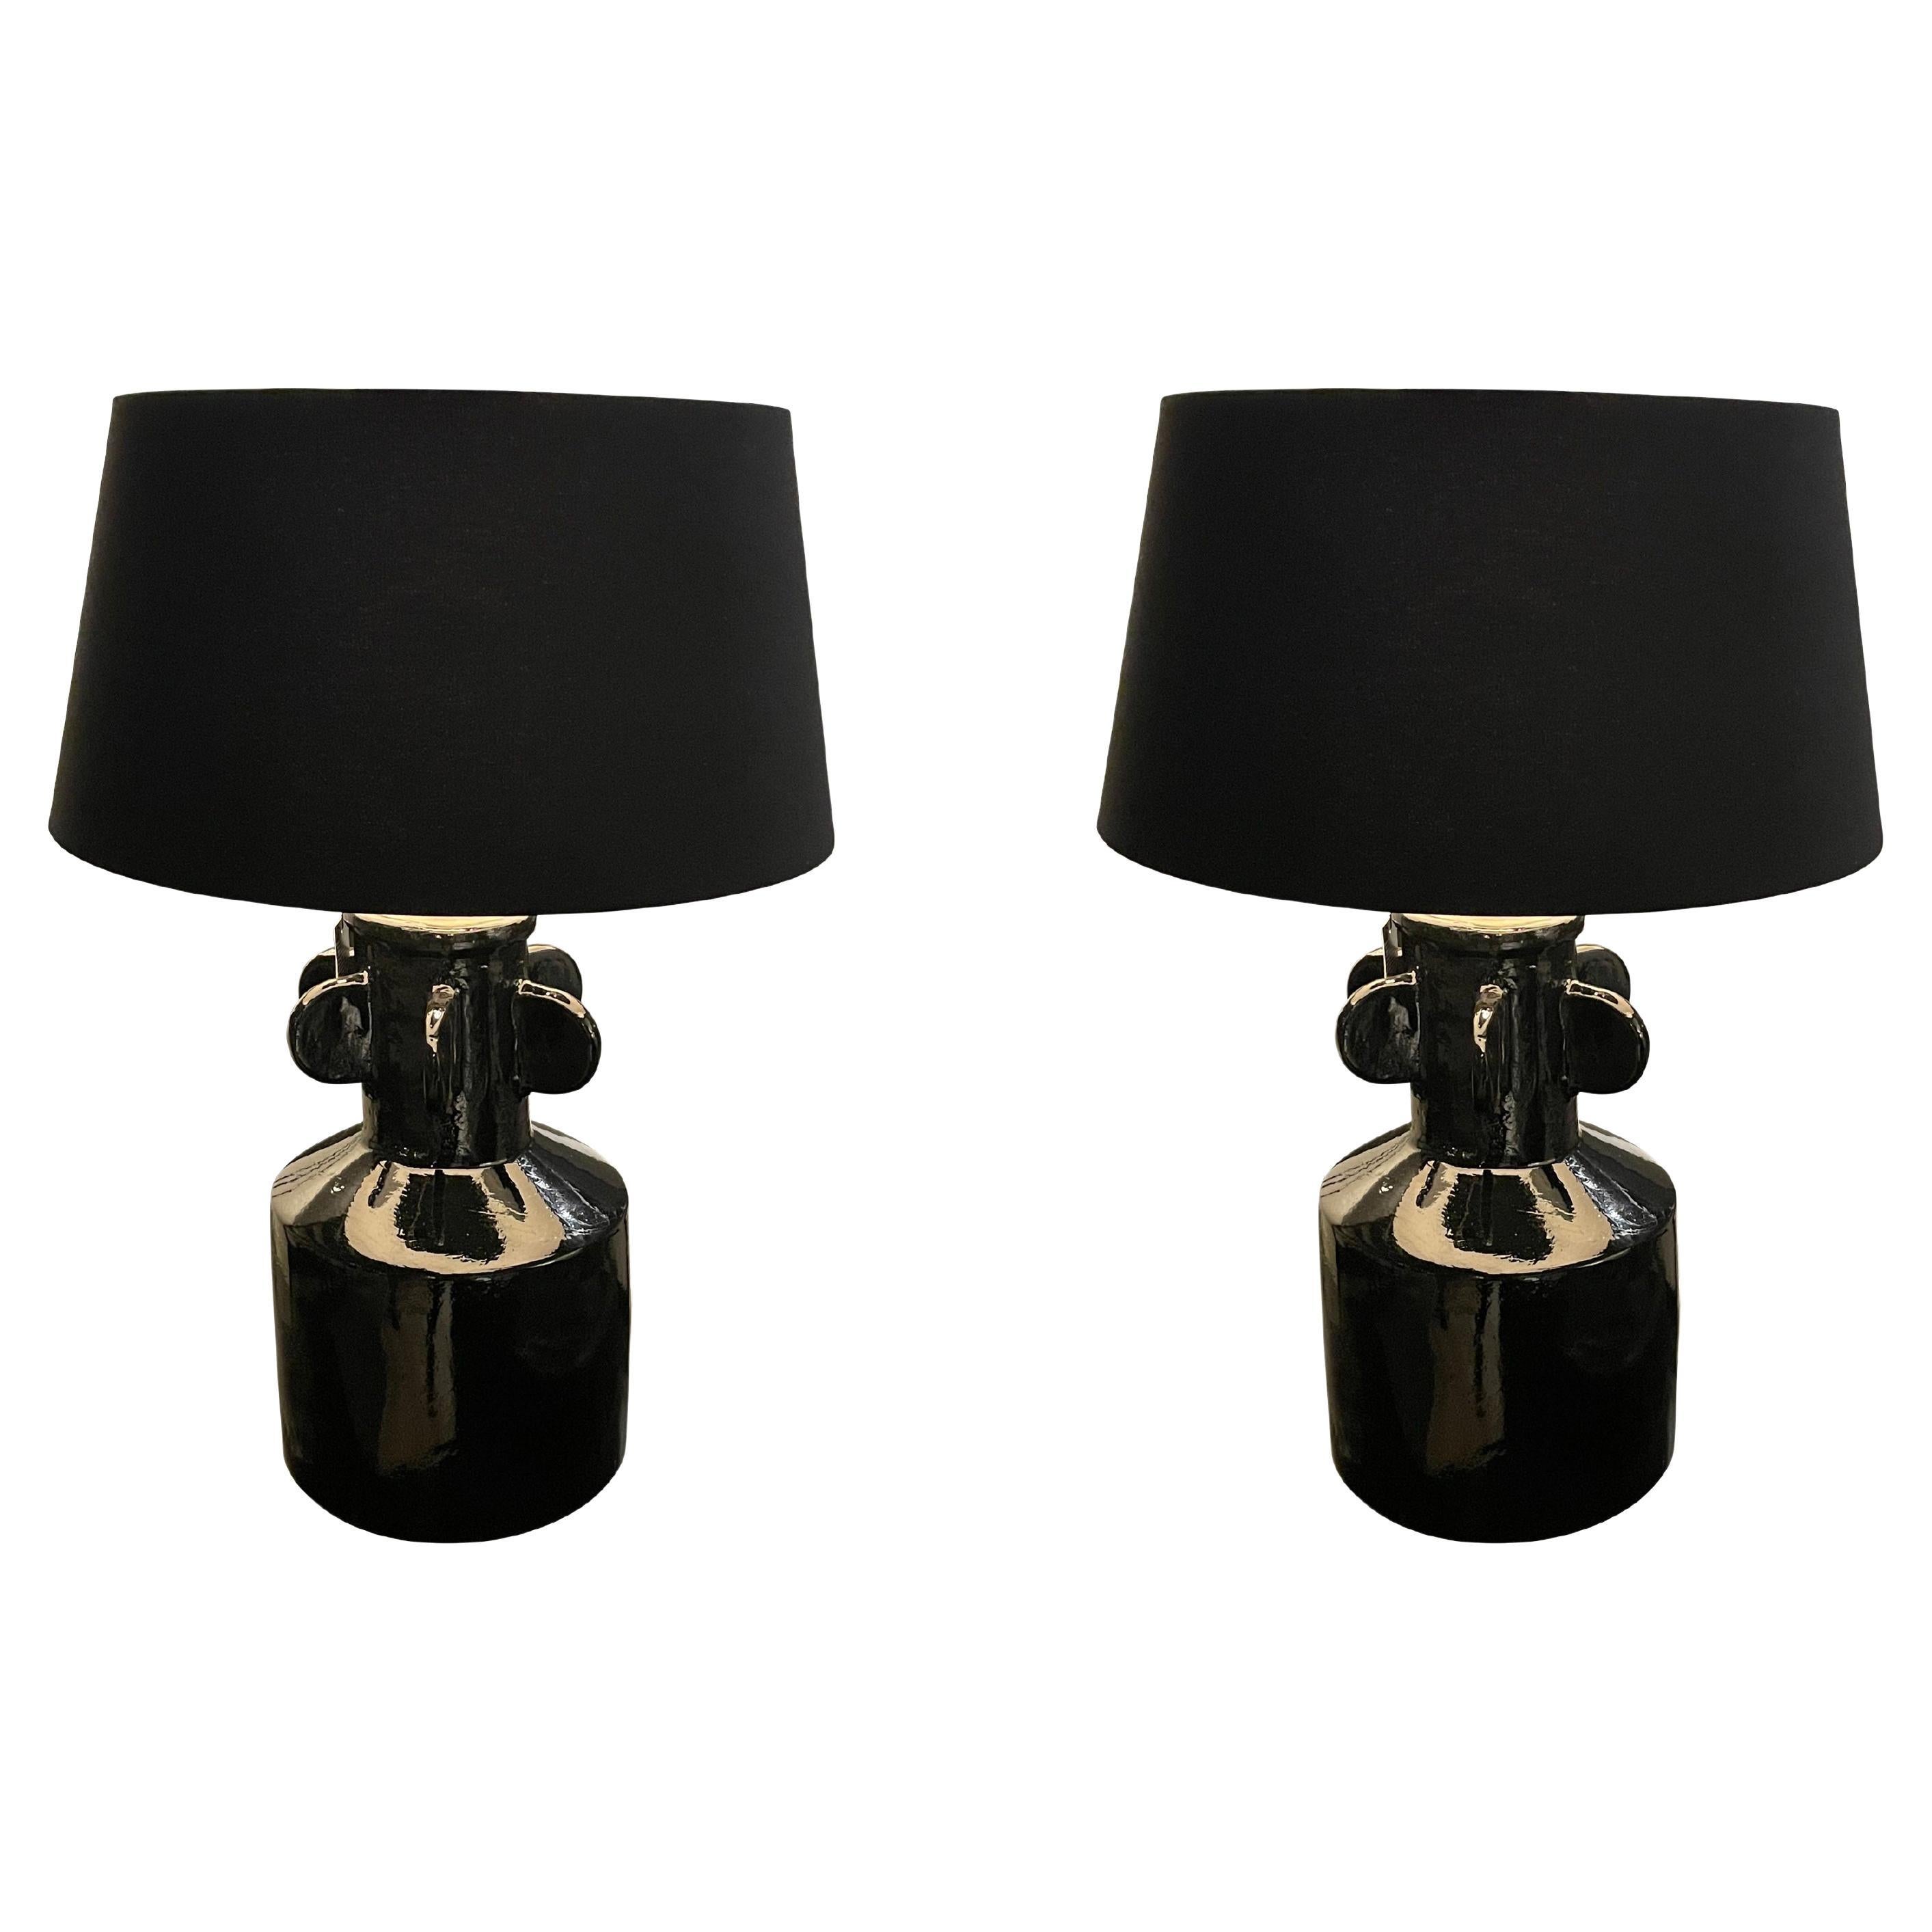 Black High Gloss Pair Of Lamps, China, Contemporary For Sale